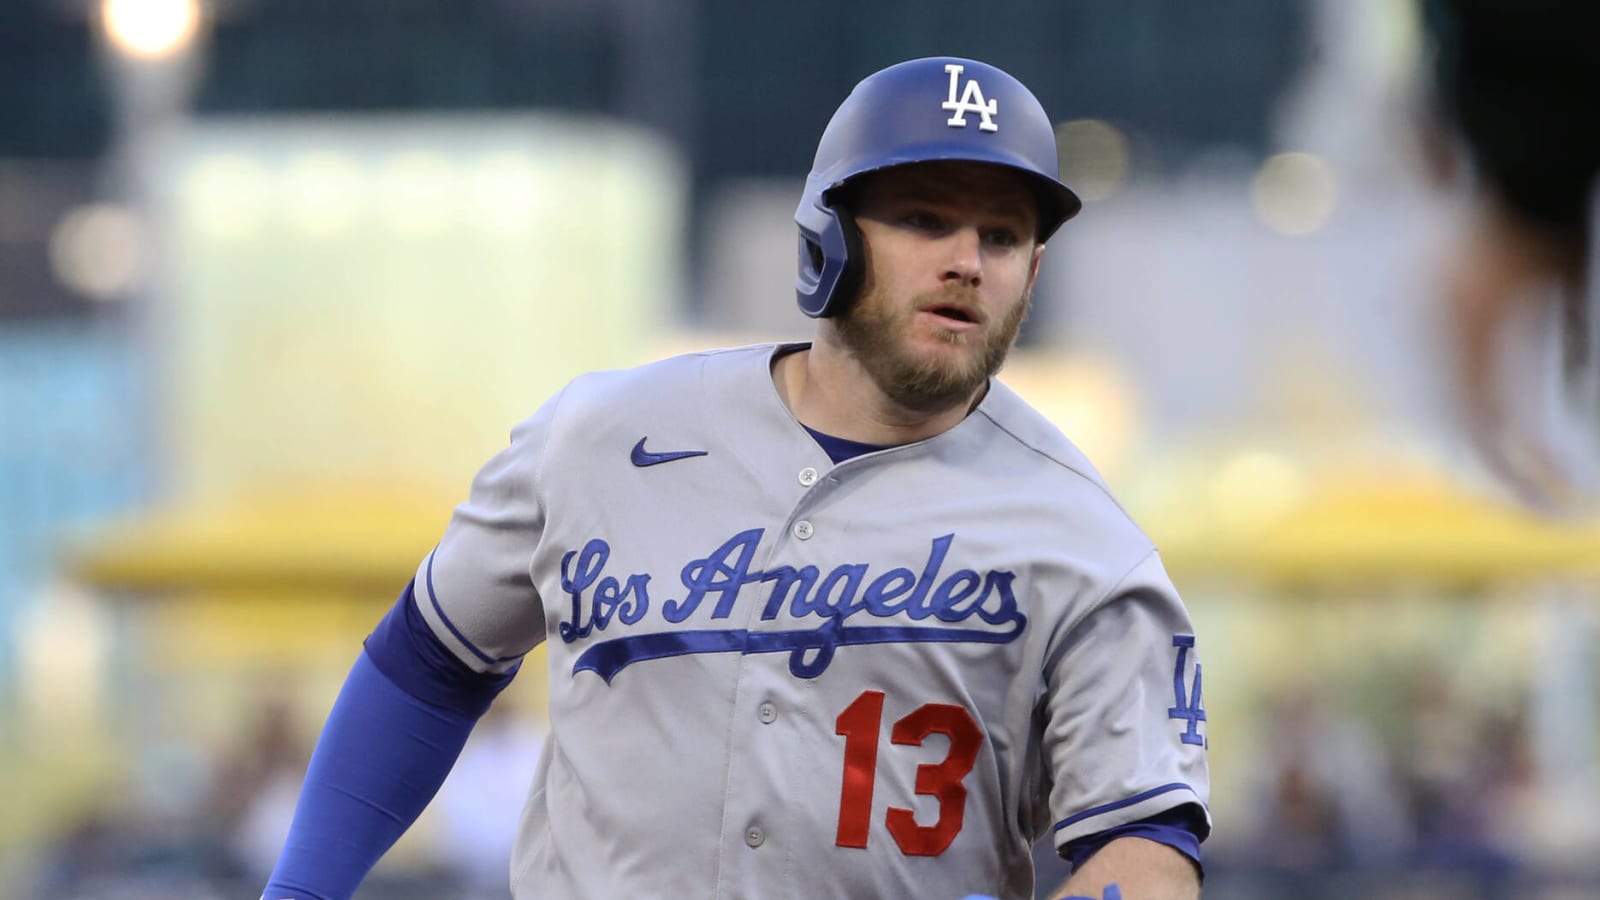 Dodgers announcer reveals why Muncy was upset in viral video